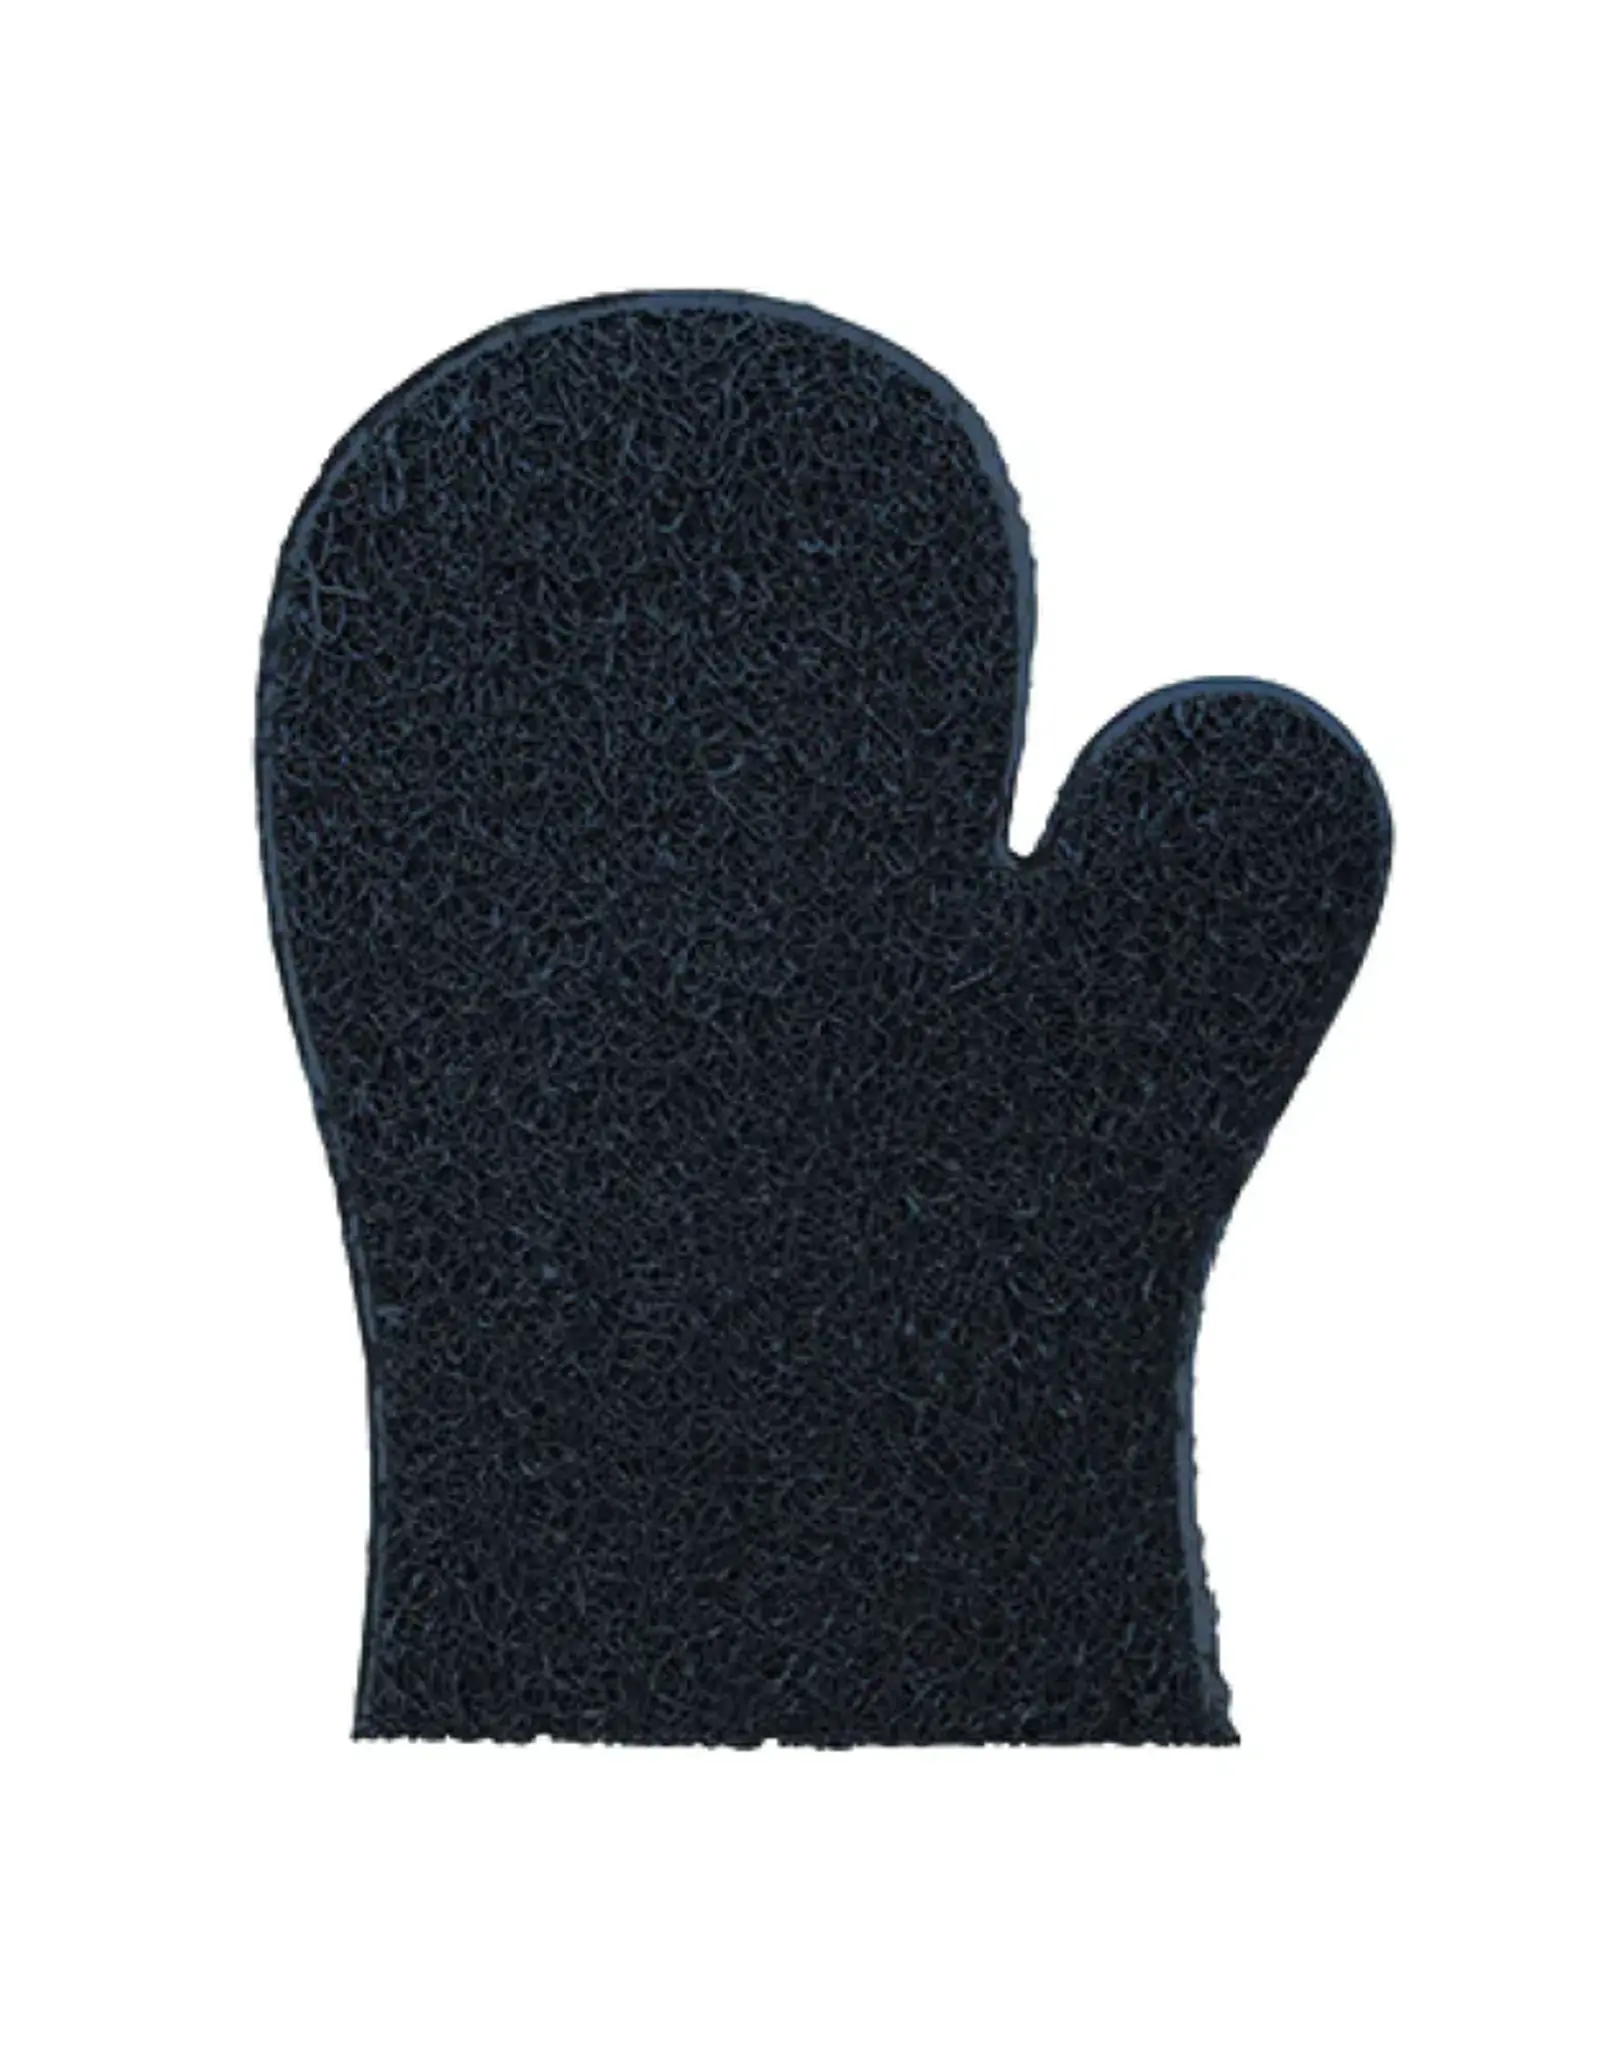 Professional's Choice Miracle Mitt